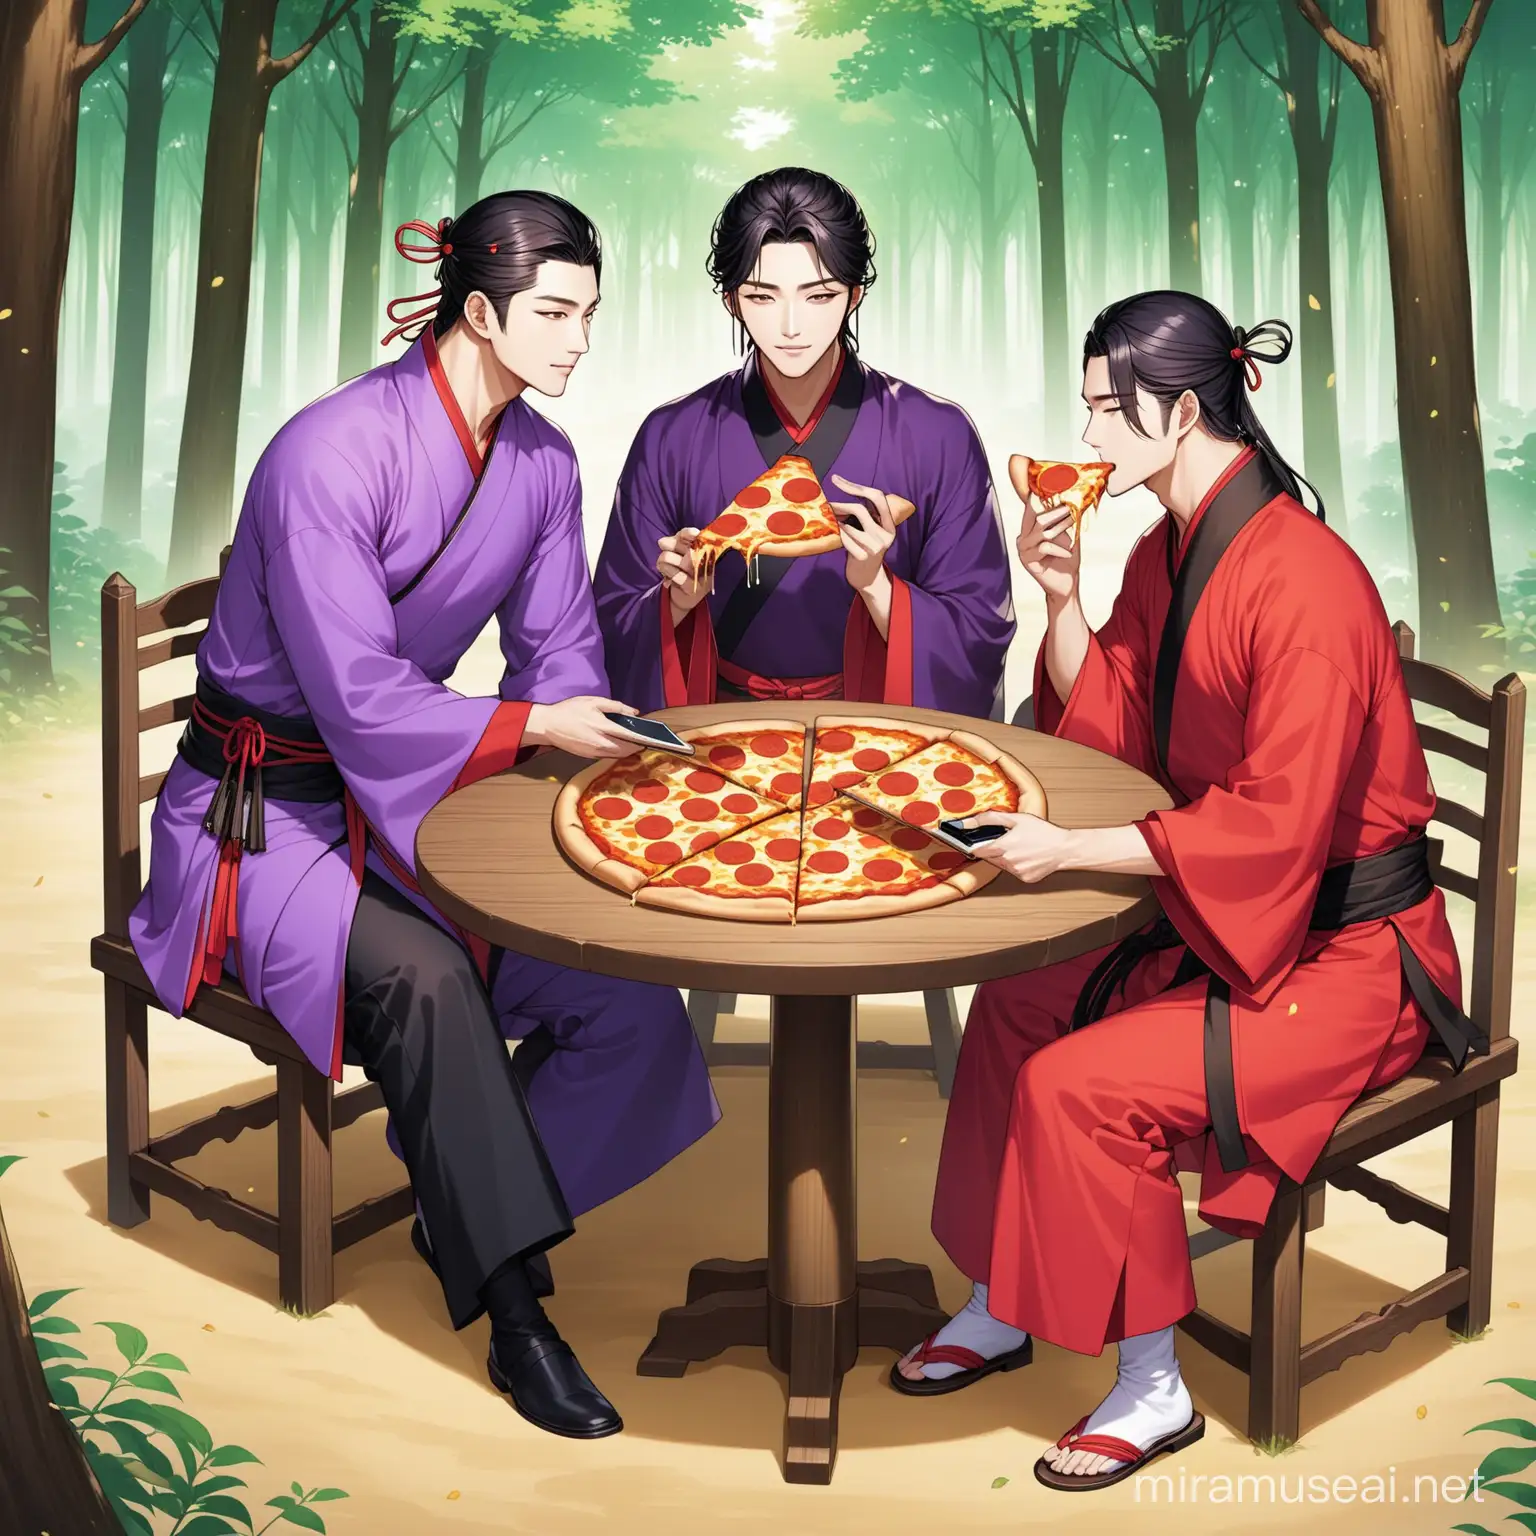 Handsome Men Enjoying Pizza in a Joseon Dynasty Forest